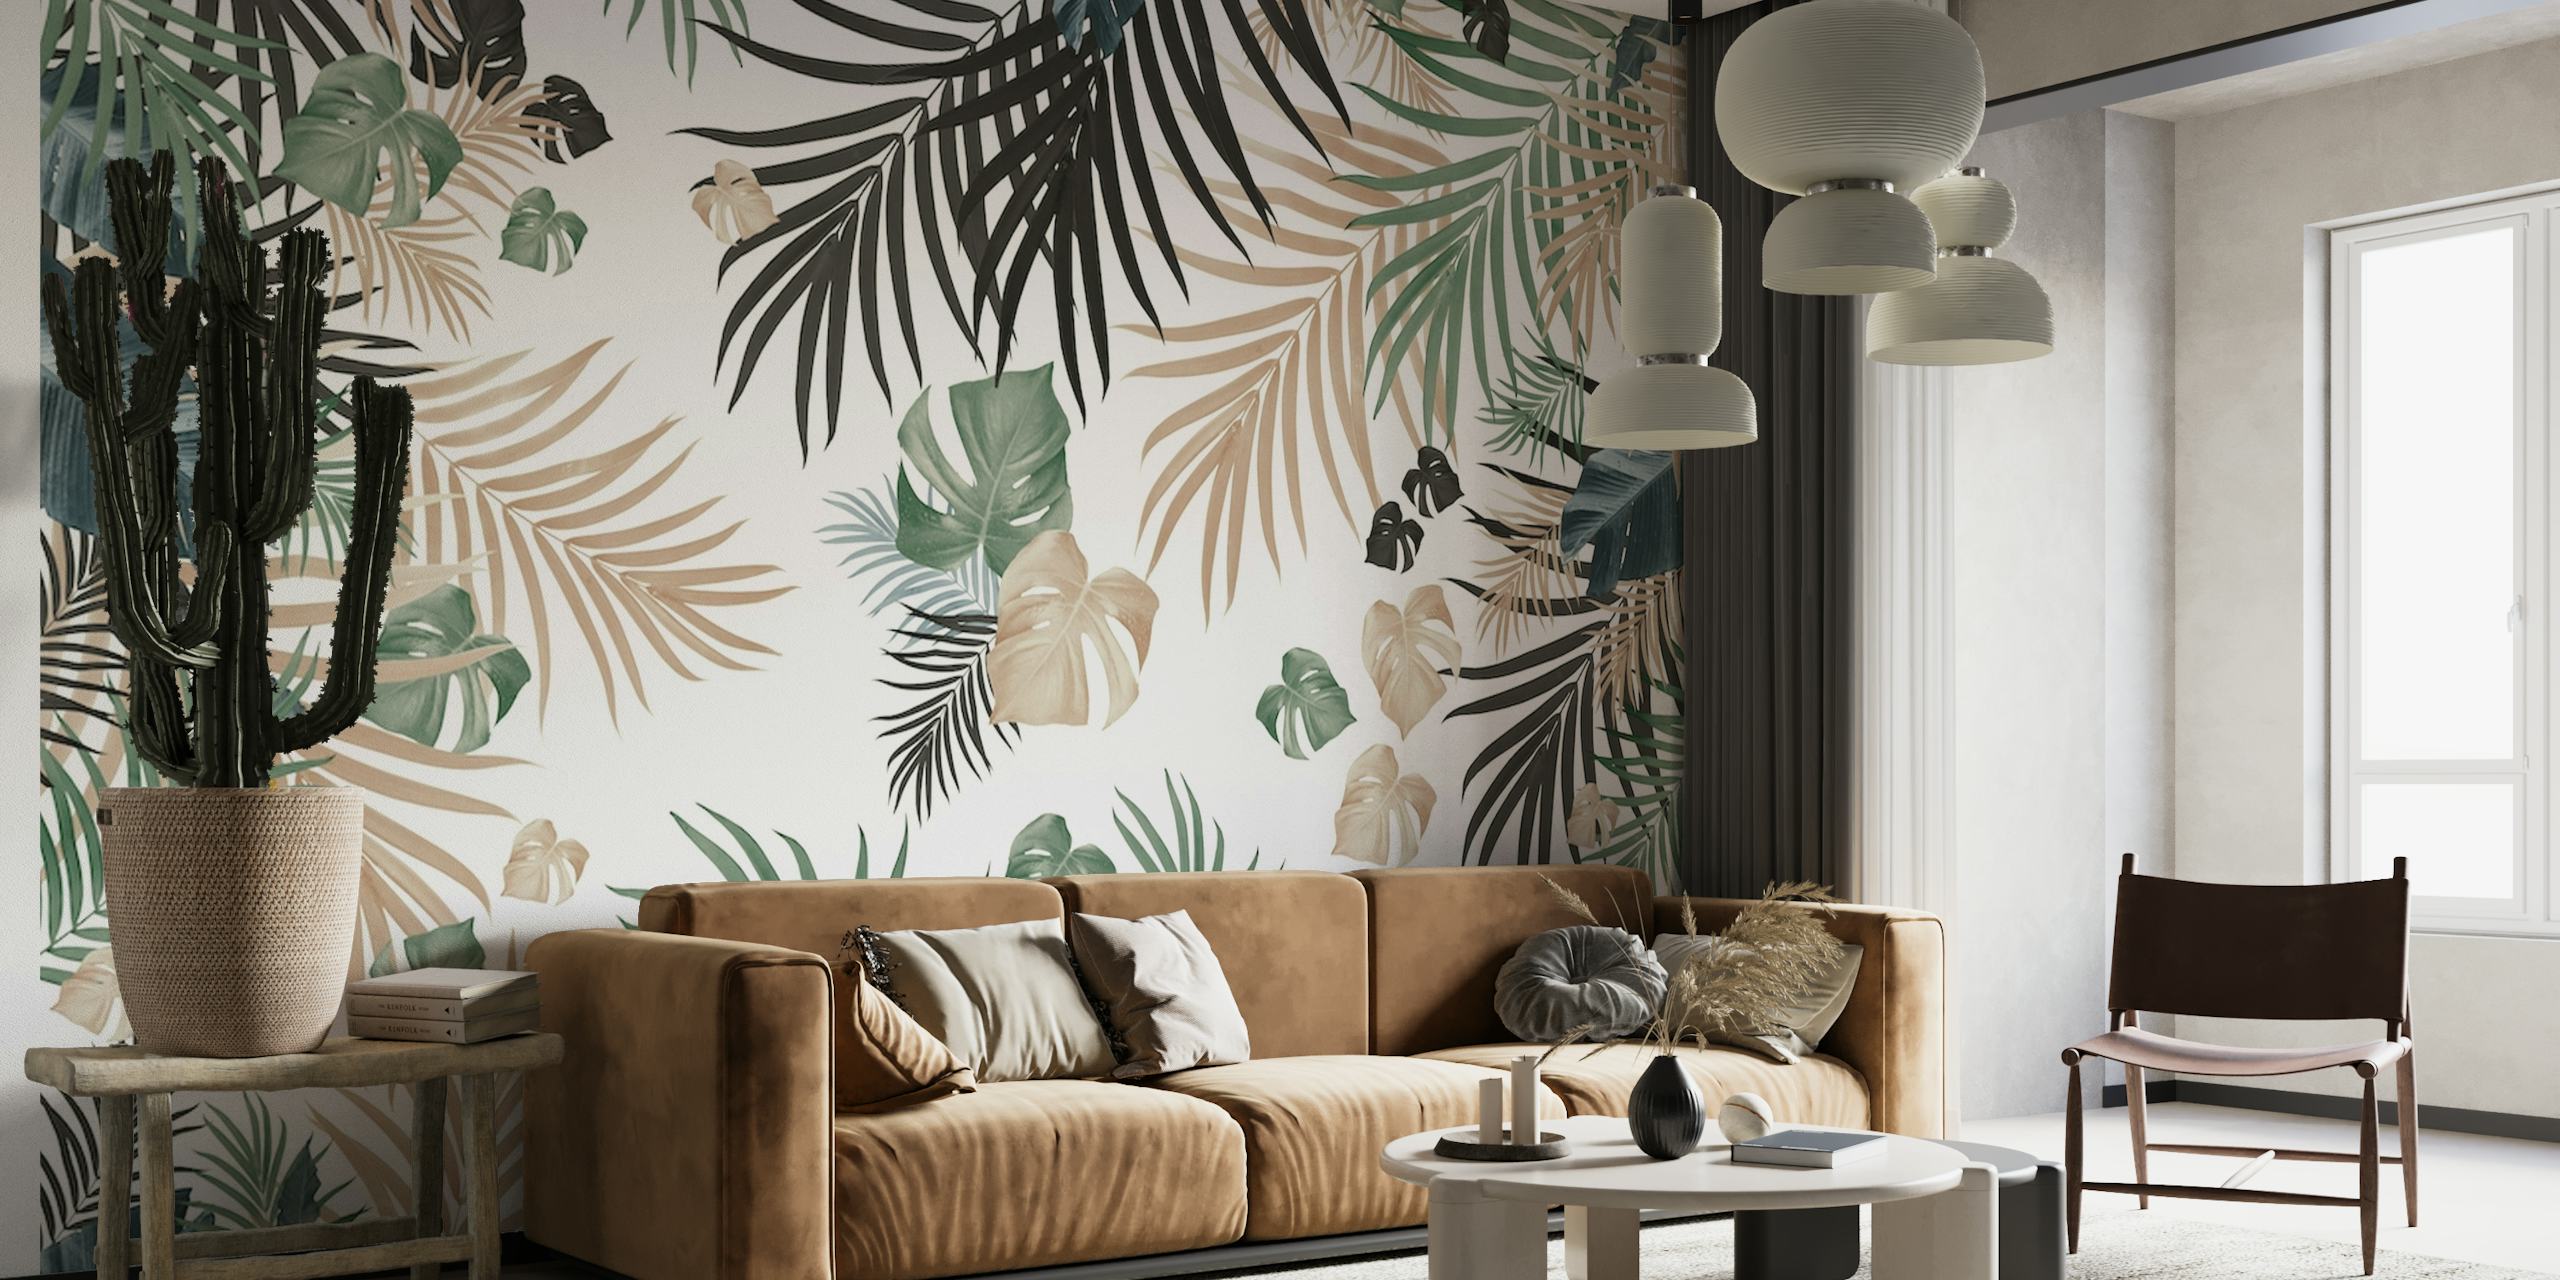 Tropical Jungle Leaves wall mural with a variety of green foliage